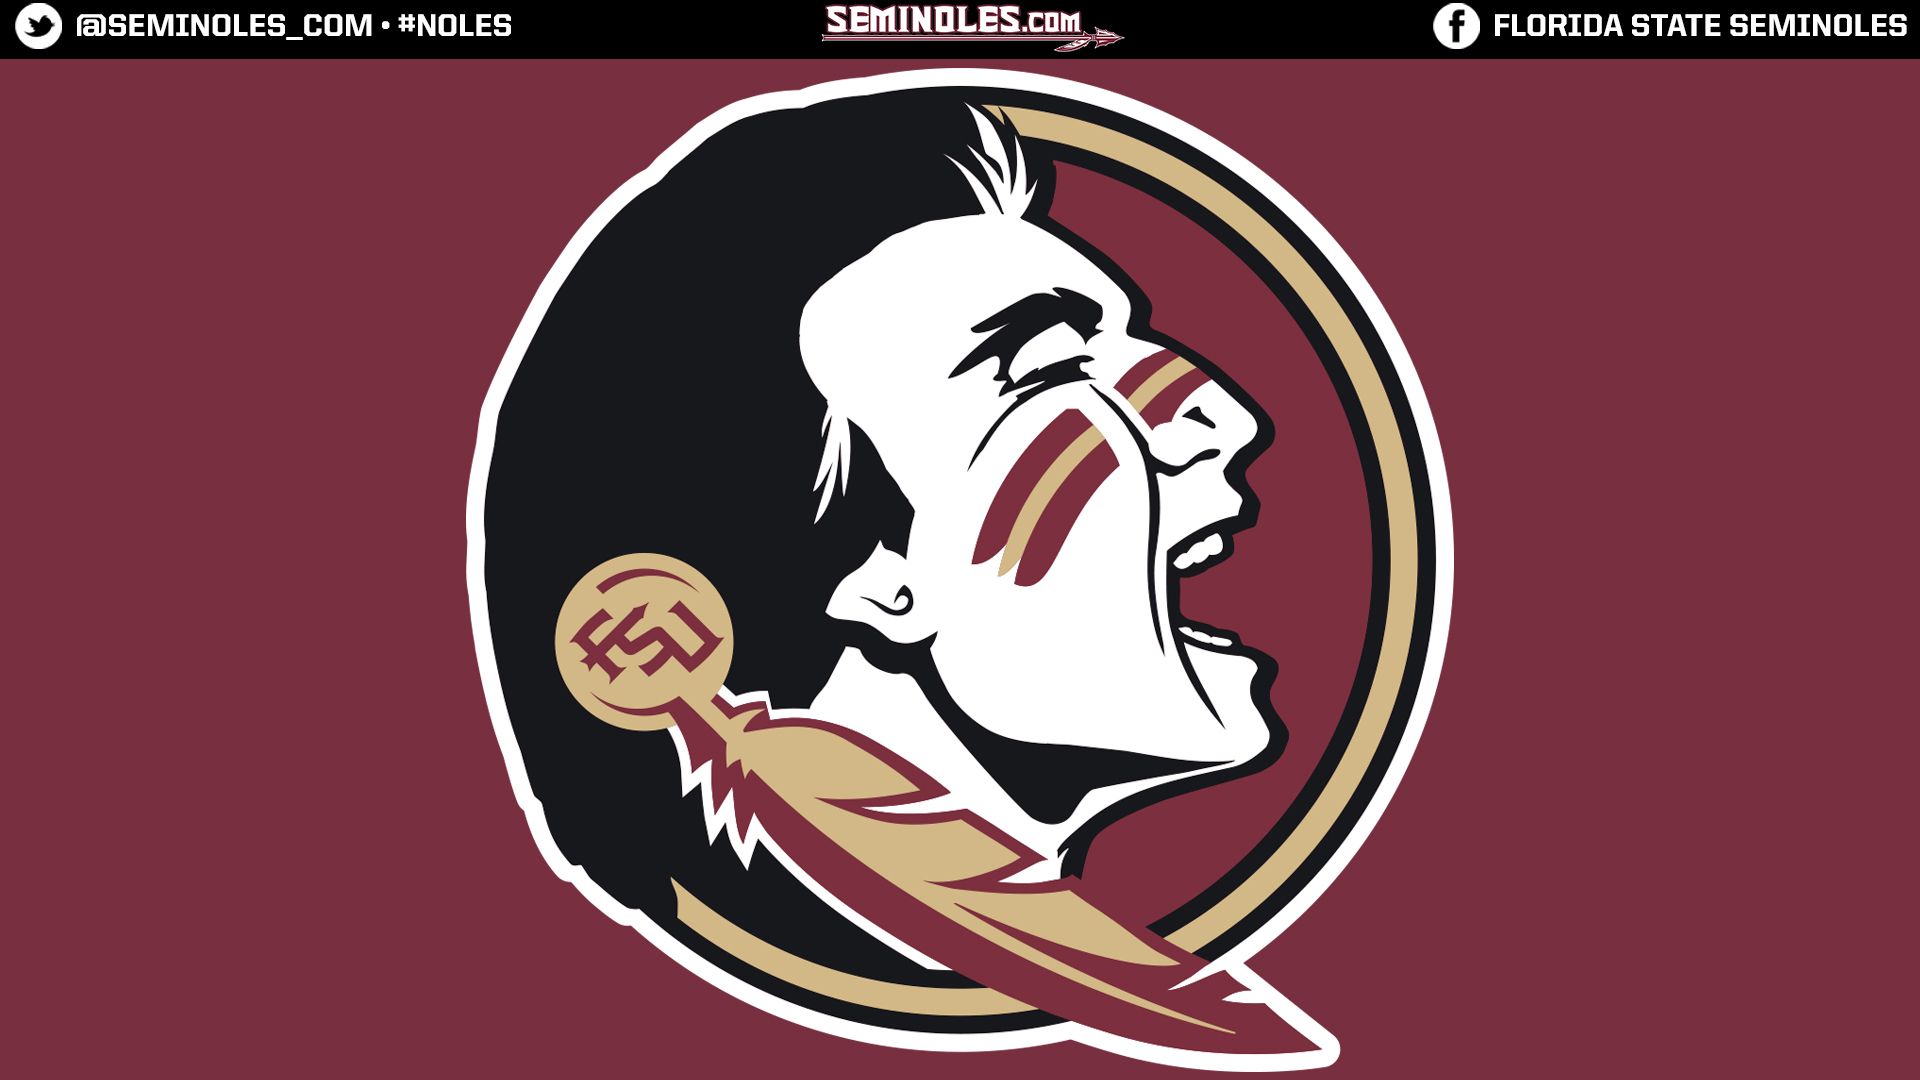  life on campus weve got the Florida State wallpapers you need 1920x1080